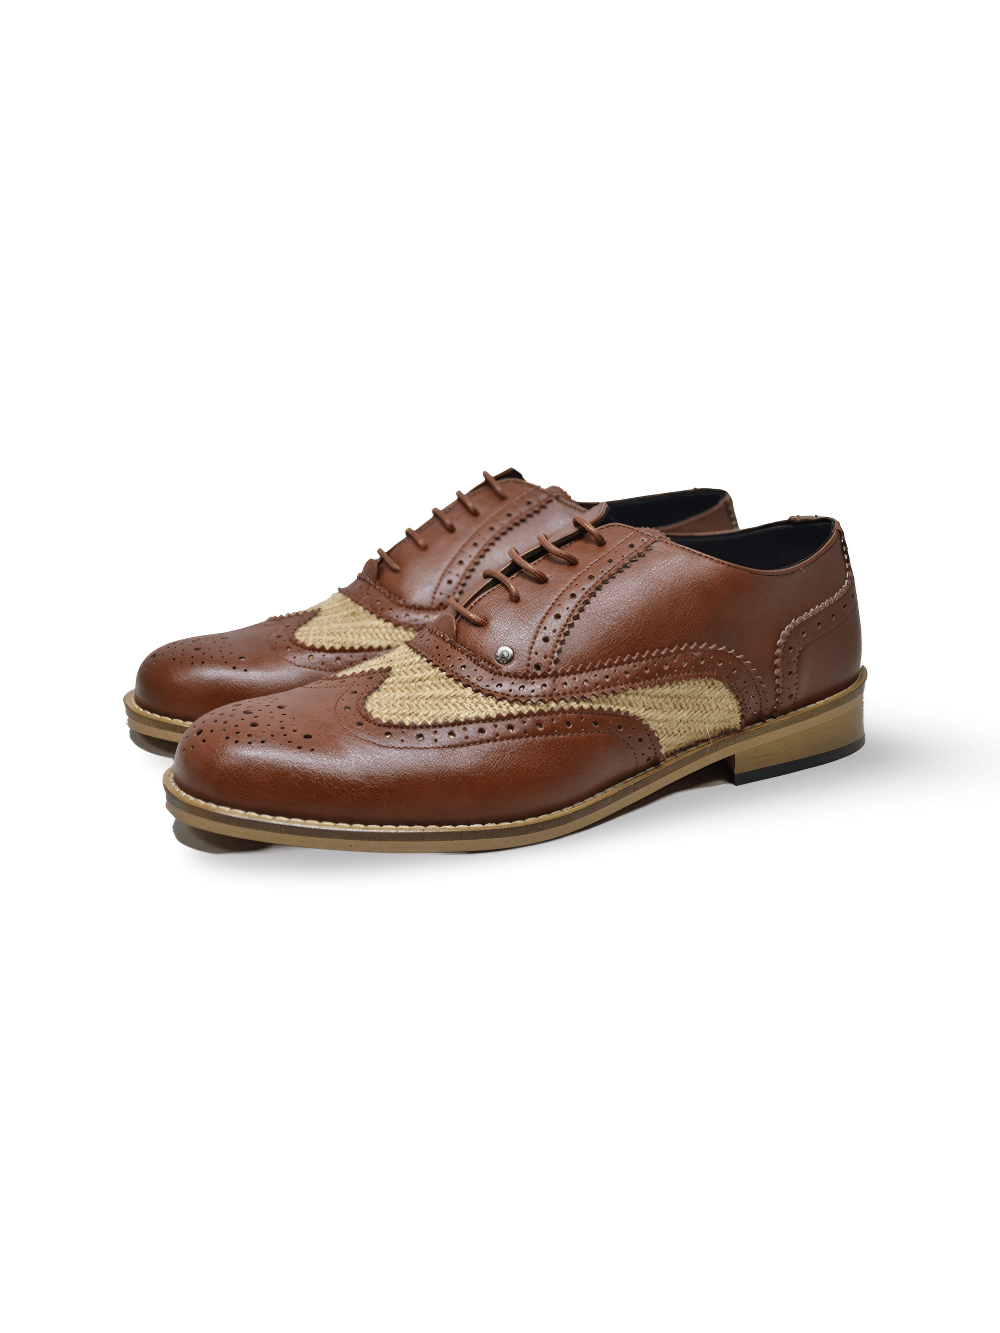 Stylish Brown Lace-Up Leather Oxford Shoes for Men